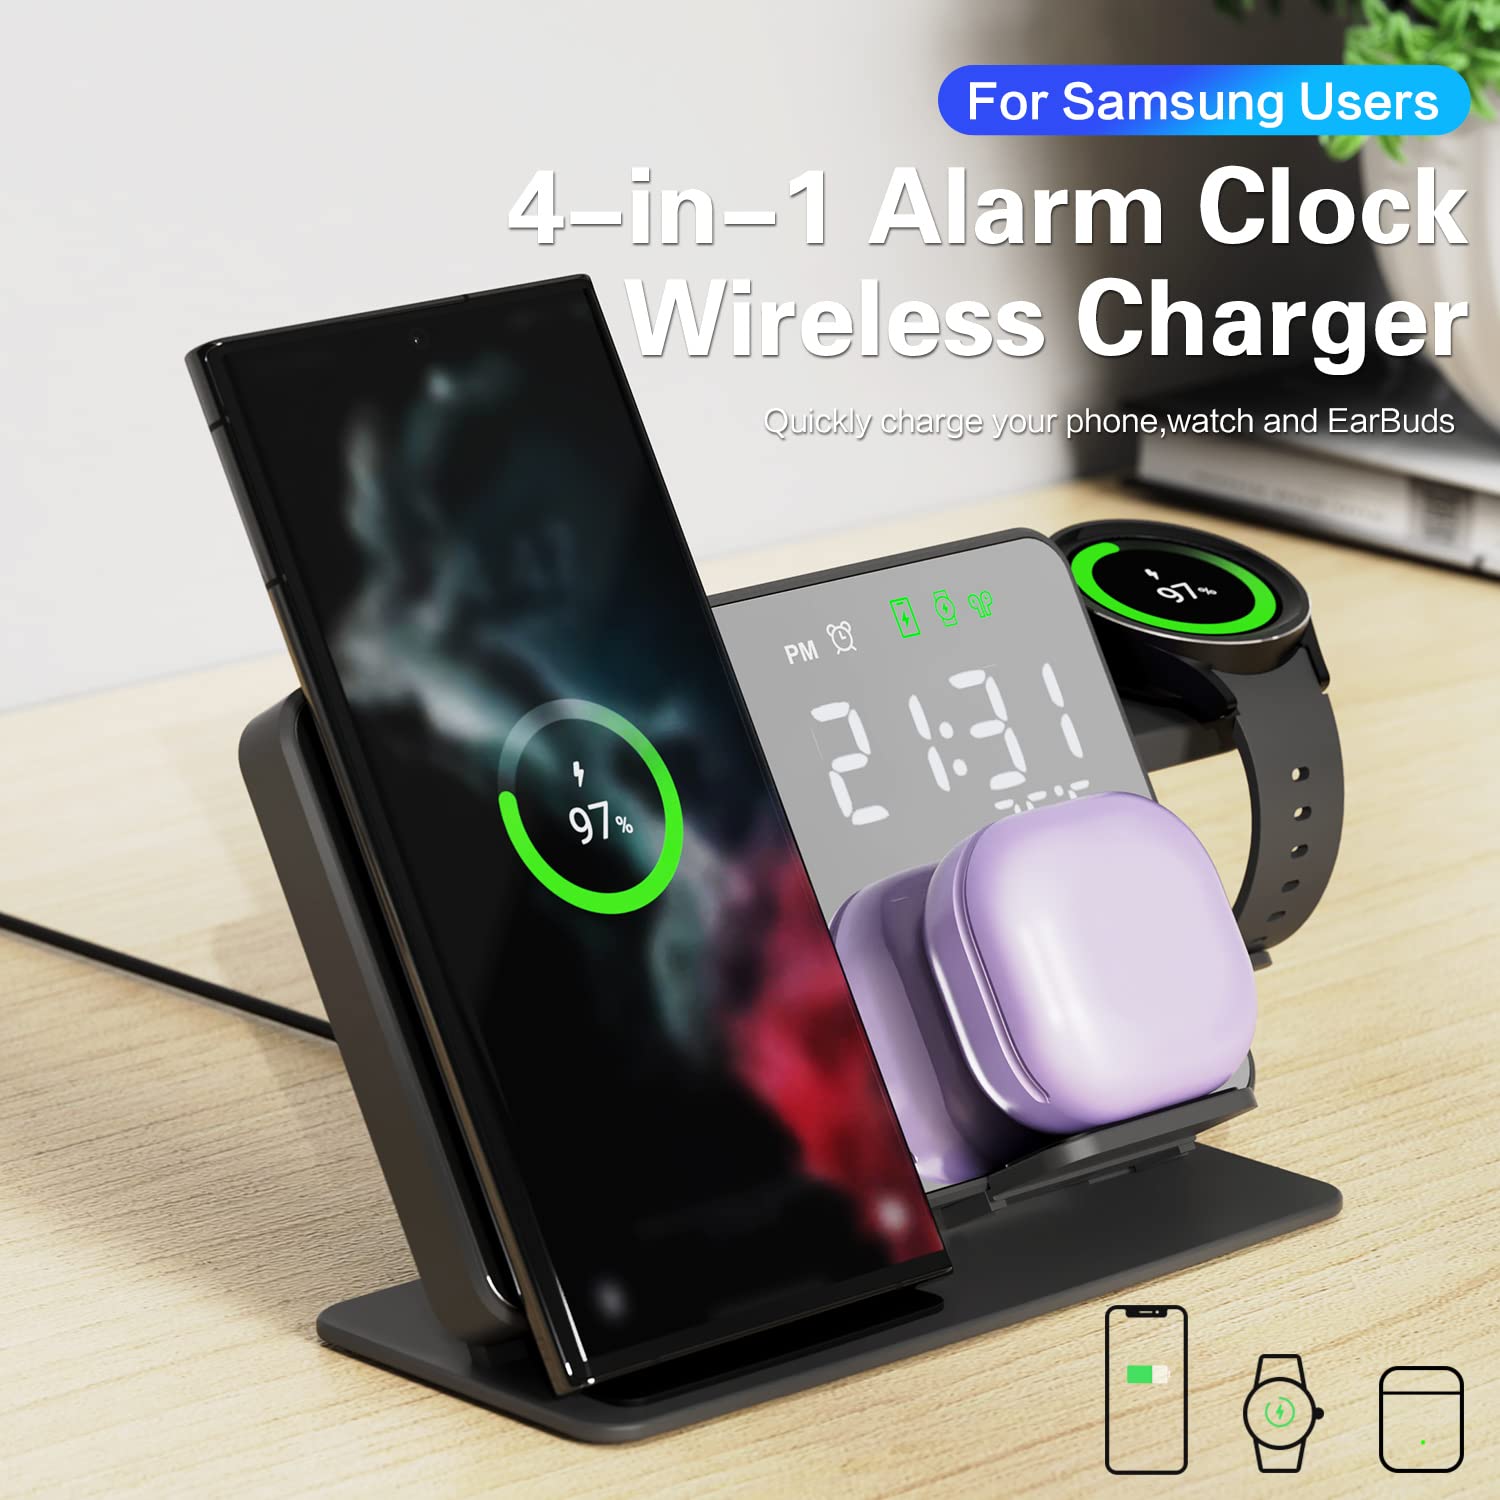 MOSHOU Wireless Charging Station for Samsung Devices, Mirror Alarm Clock Charging Dock for Galaxy S23 S22 S21 S20 S10/Note 20 10 9/ Z Flip Fold 4, Galaxy Watch 5 Pro/5/4/3, Galaxy Buds(with Adapter)